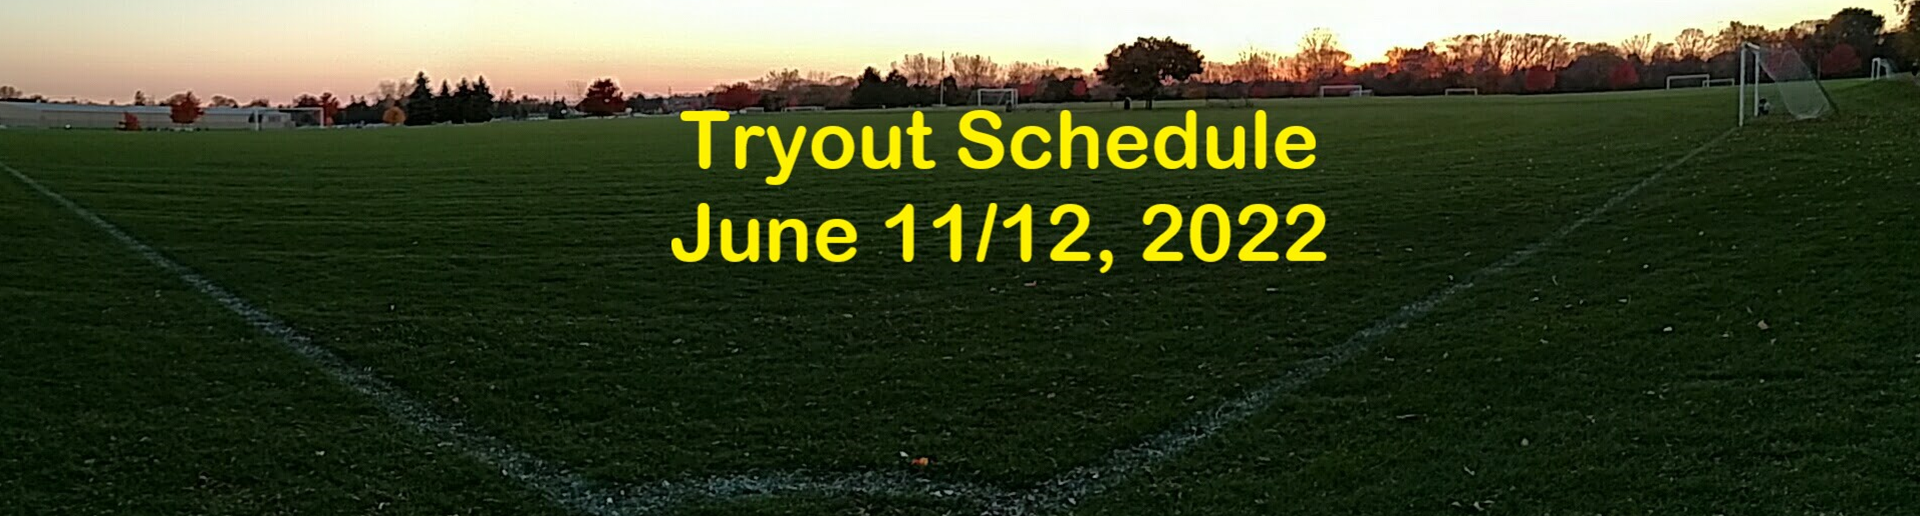 2022/23 Select/Premier Tryout Schedule